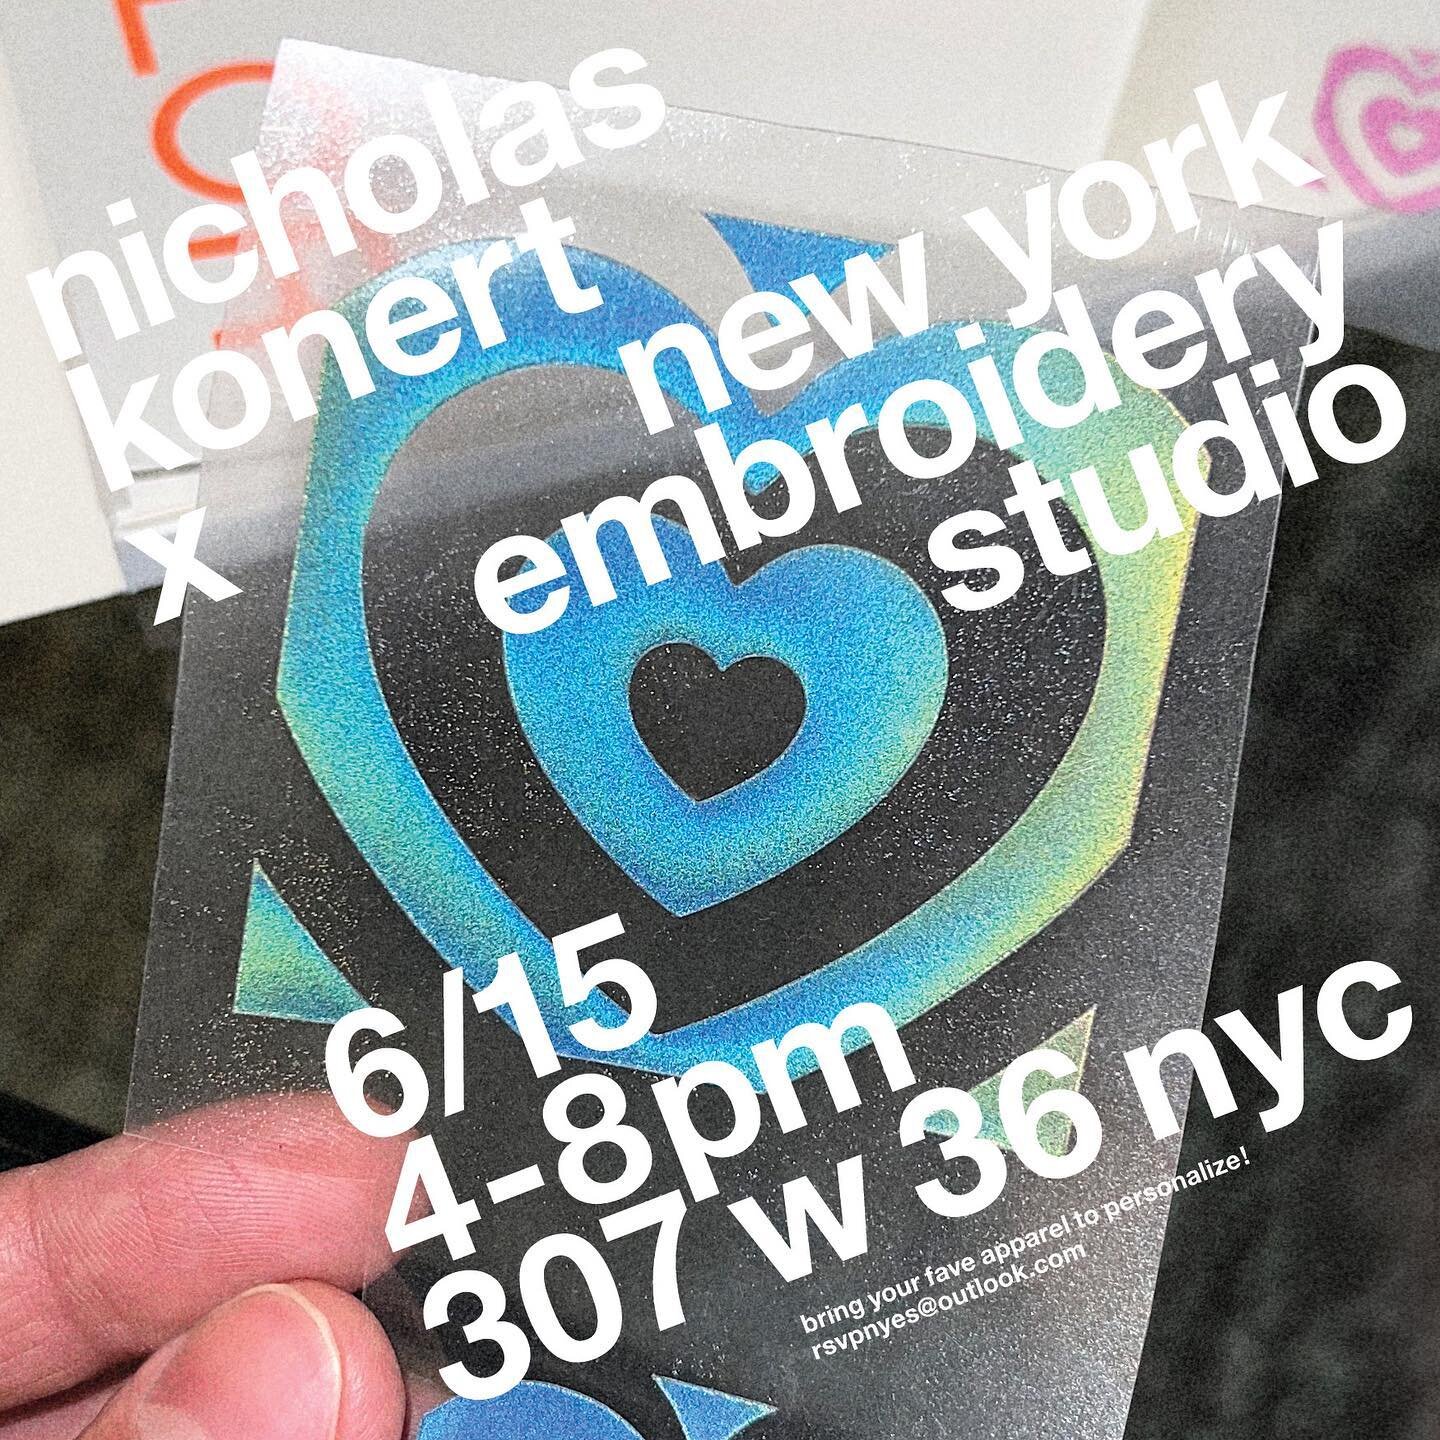 Hey NYC friends! Join me on June 15th from 4-8pm. I&rsquo;m hosting a personalization event at NY Embroidery in the Garment District. I&rsquo;d love to invite and see you if you&rsquo;re available. Bring your fave apparel, and we can personalize it w